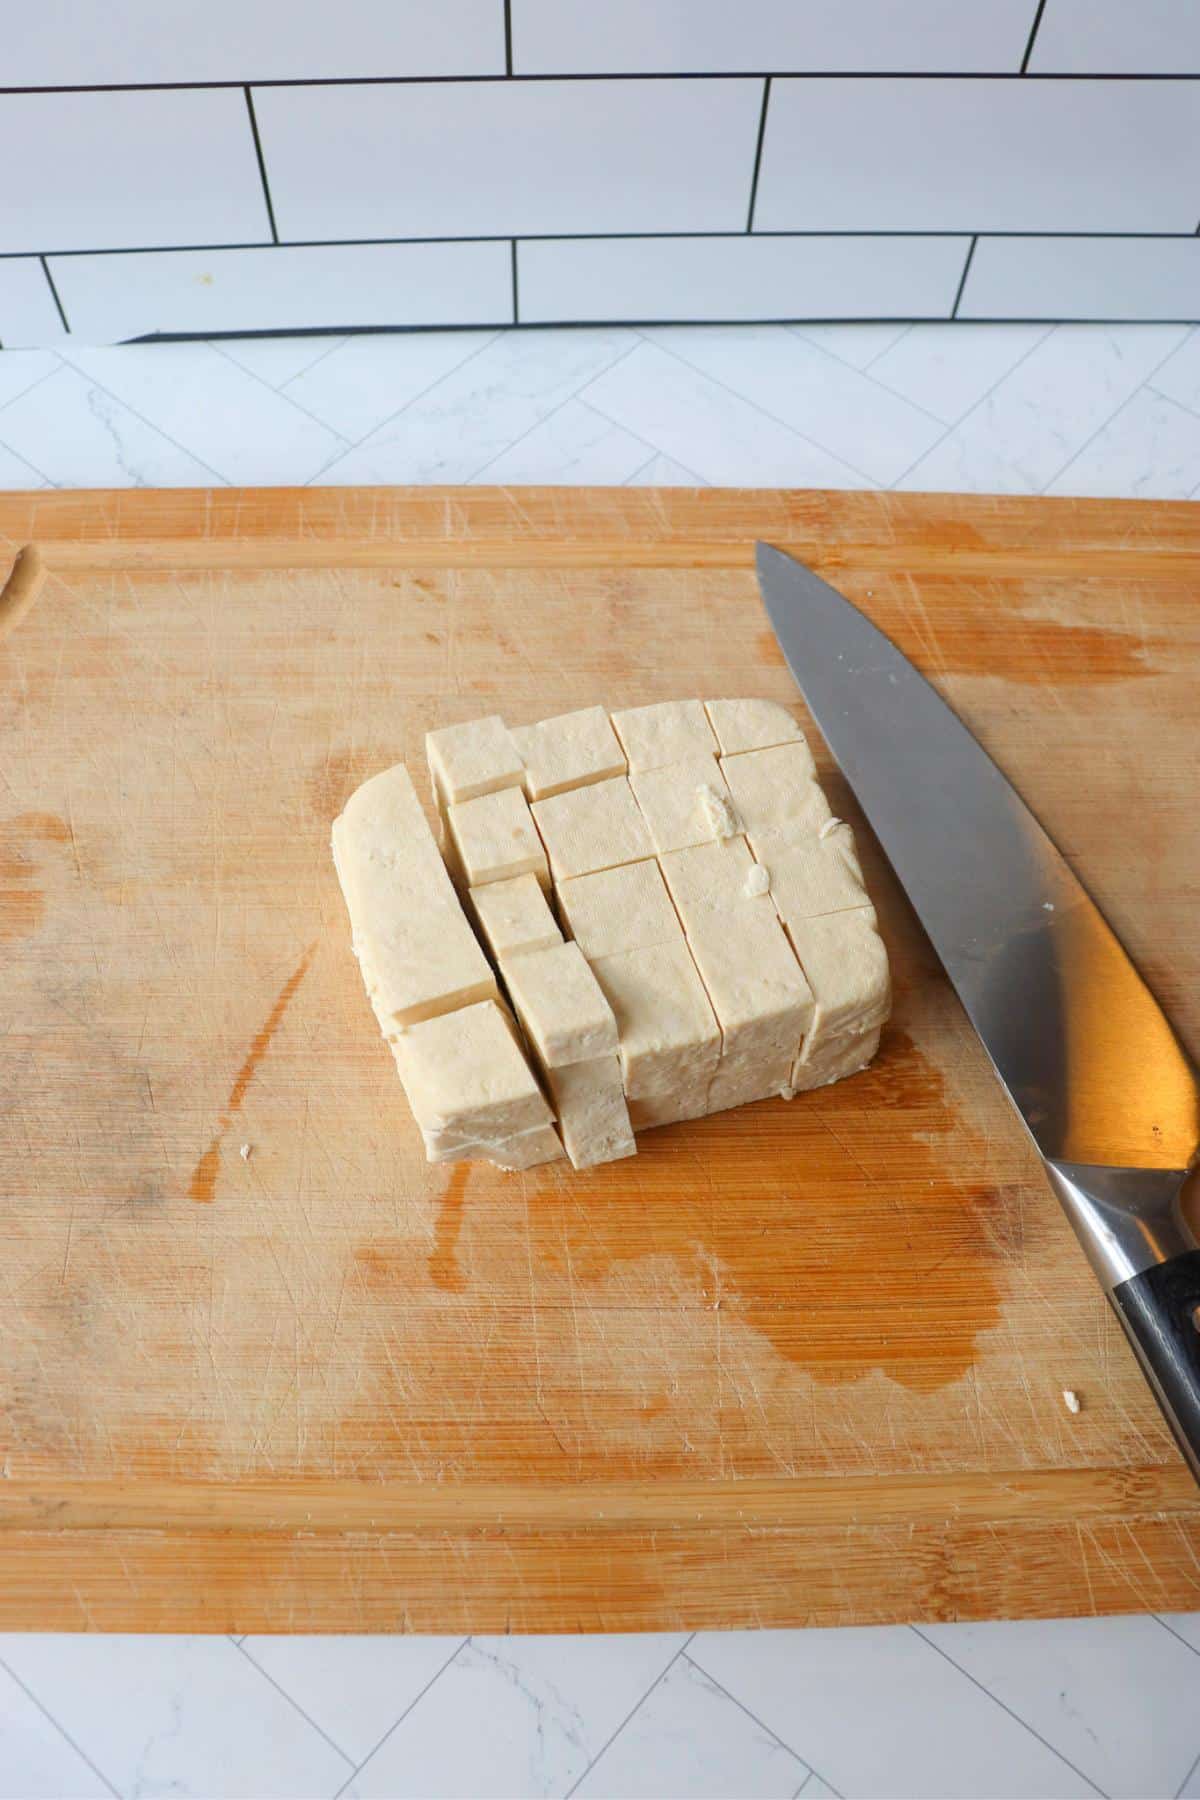 Tofu block being cut into cubes.